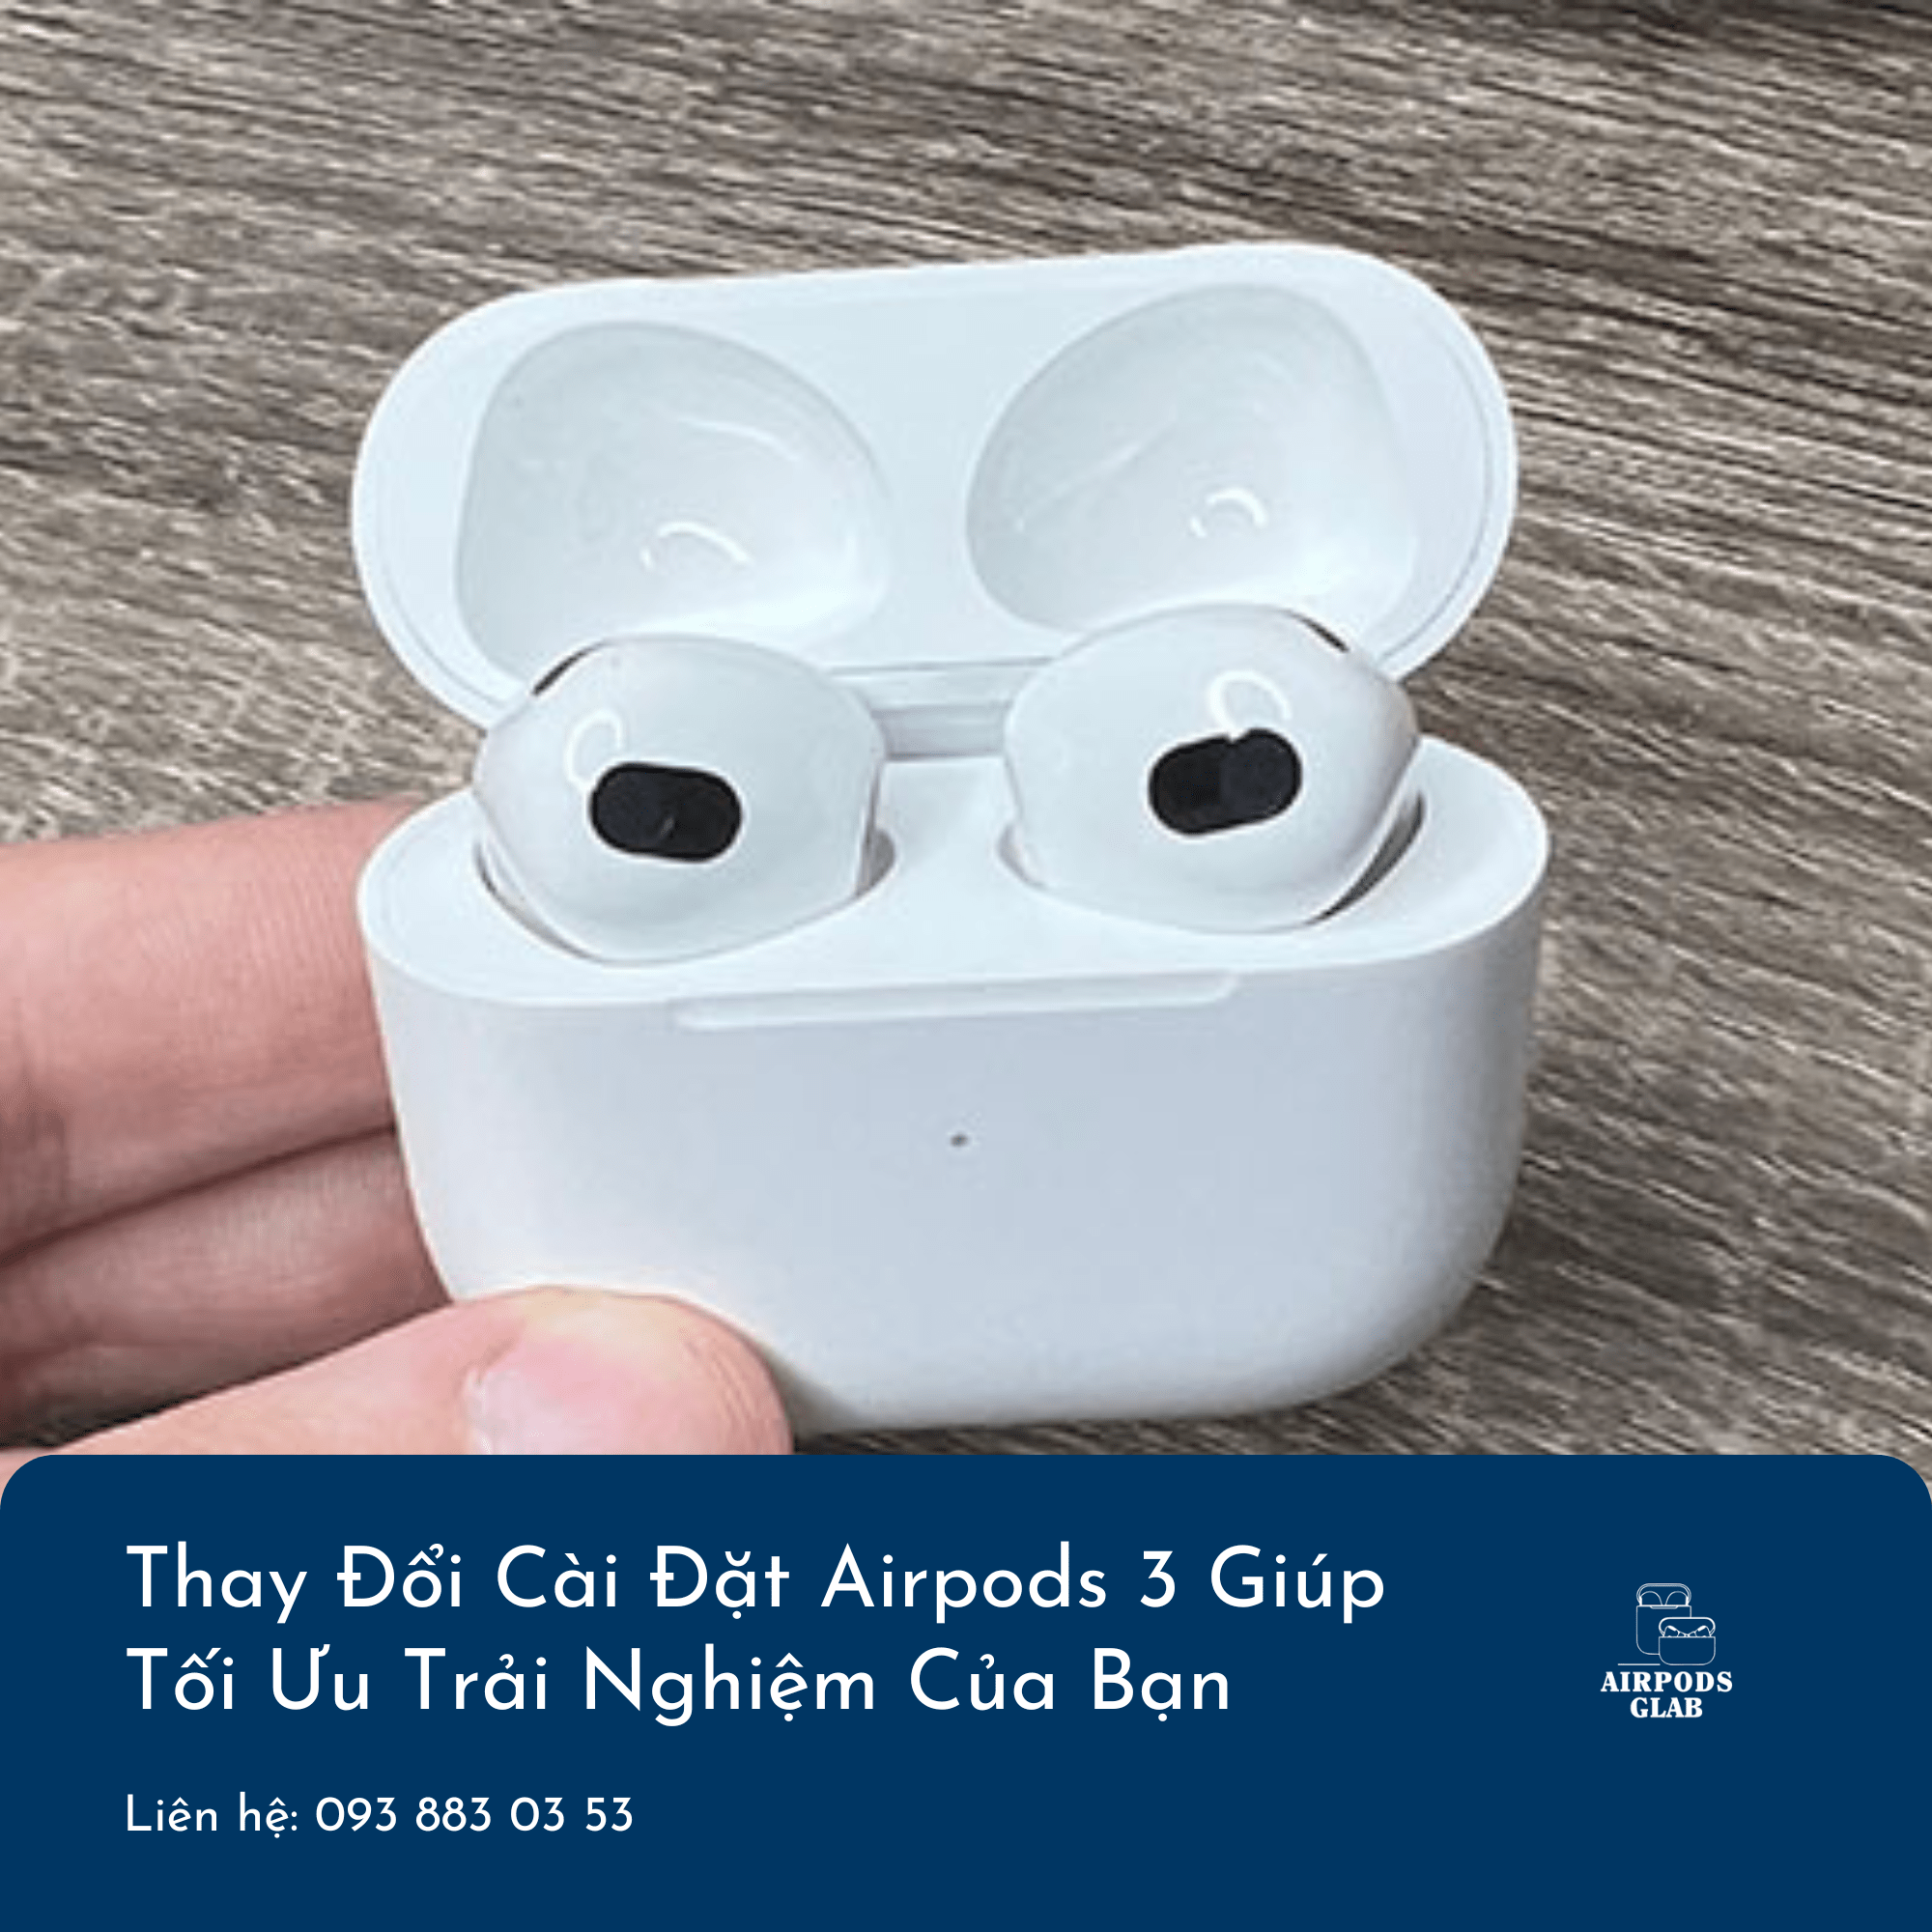 thay-doi-cai-dat-airpods-3